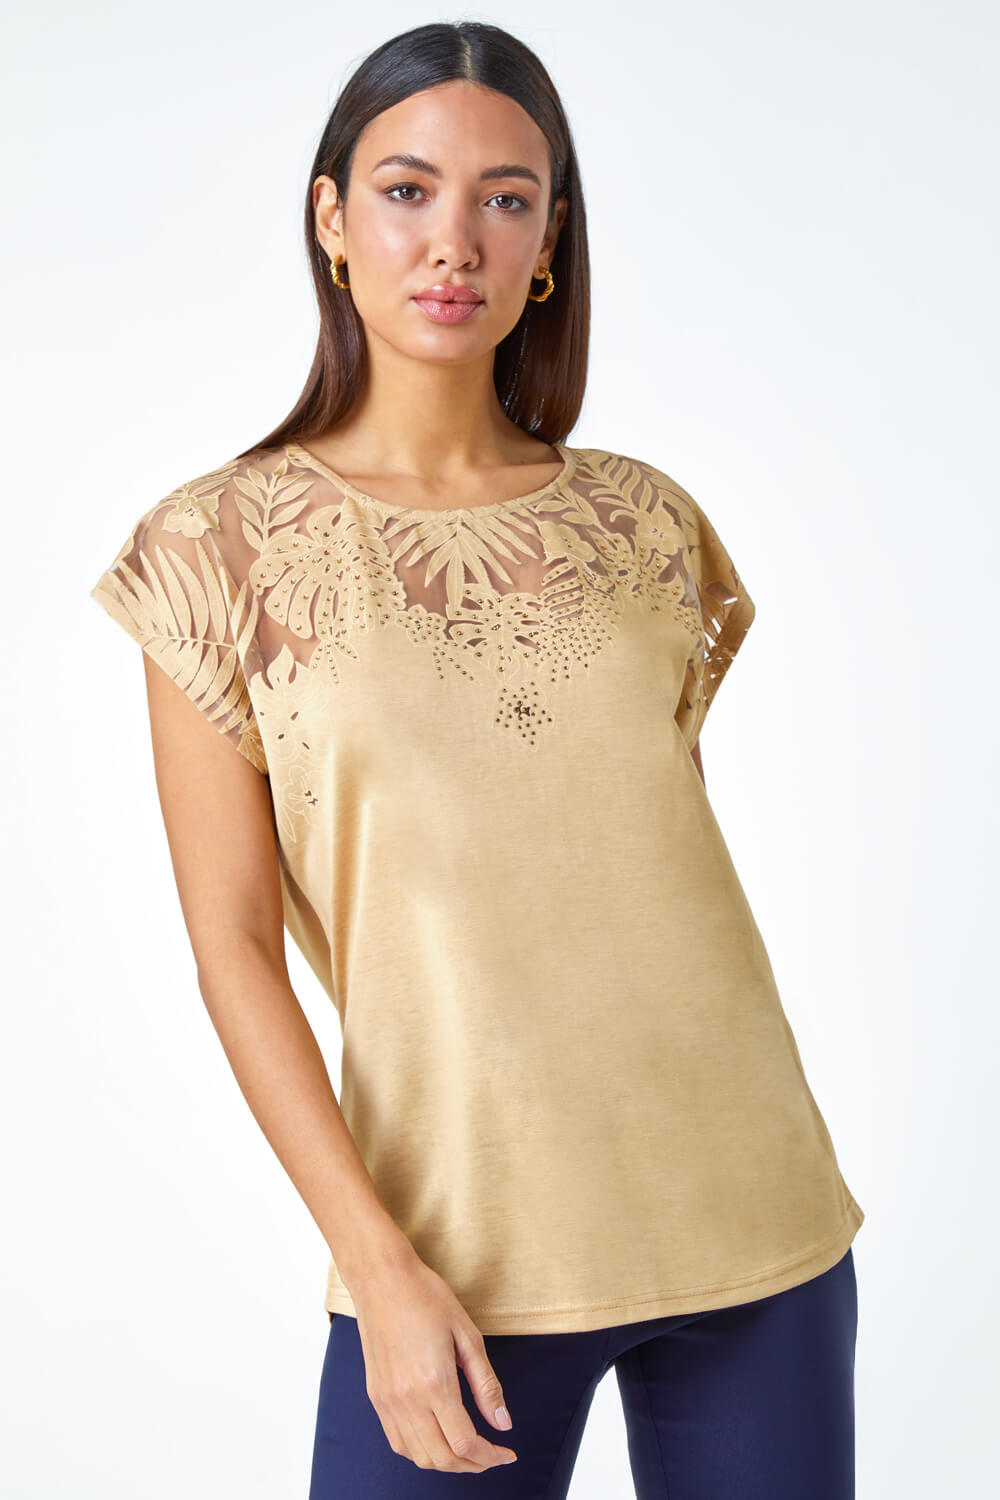 Gold Embellished Palm Print Cut Out T-Shirt, Image 2 of 5